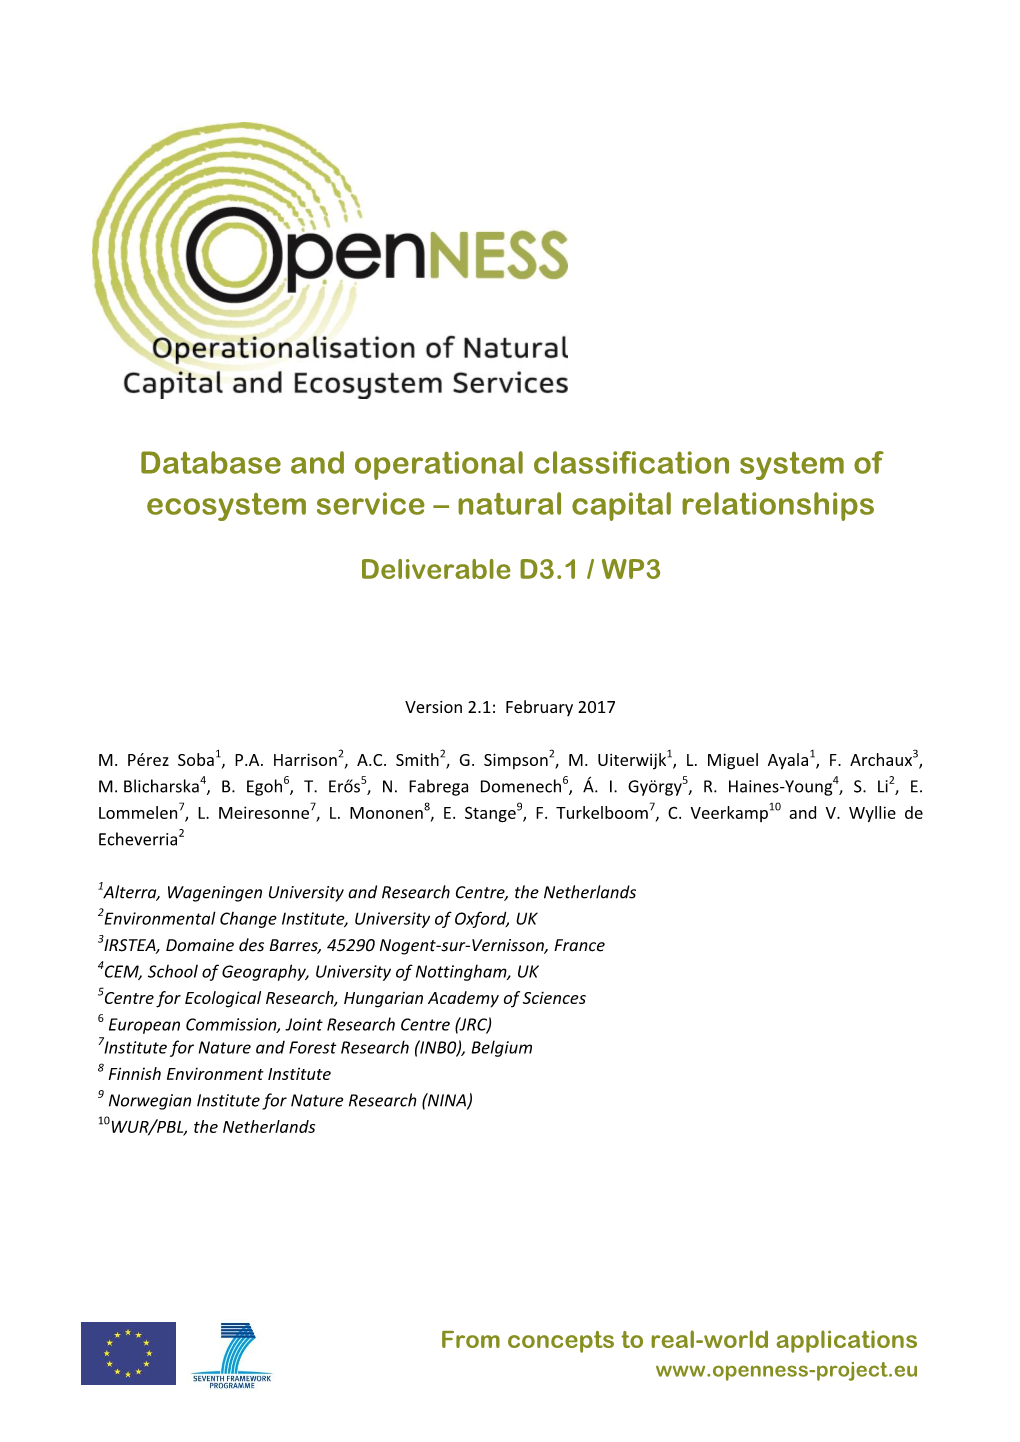 Database and Operational Classification System of Ecosystem Service – Natural Capital Relationships